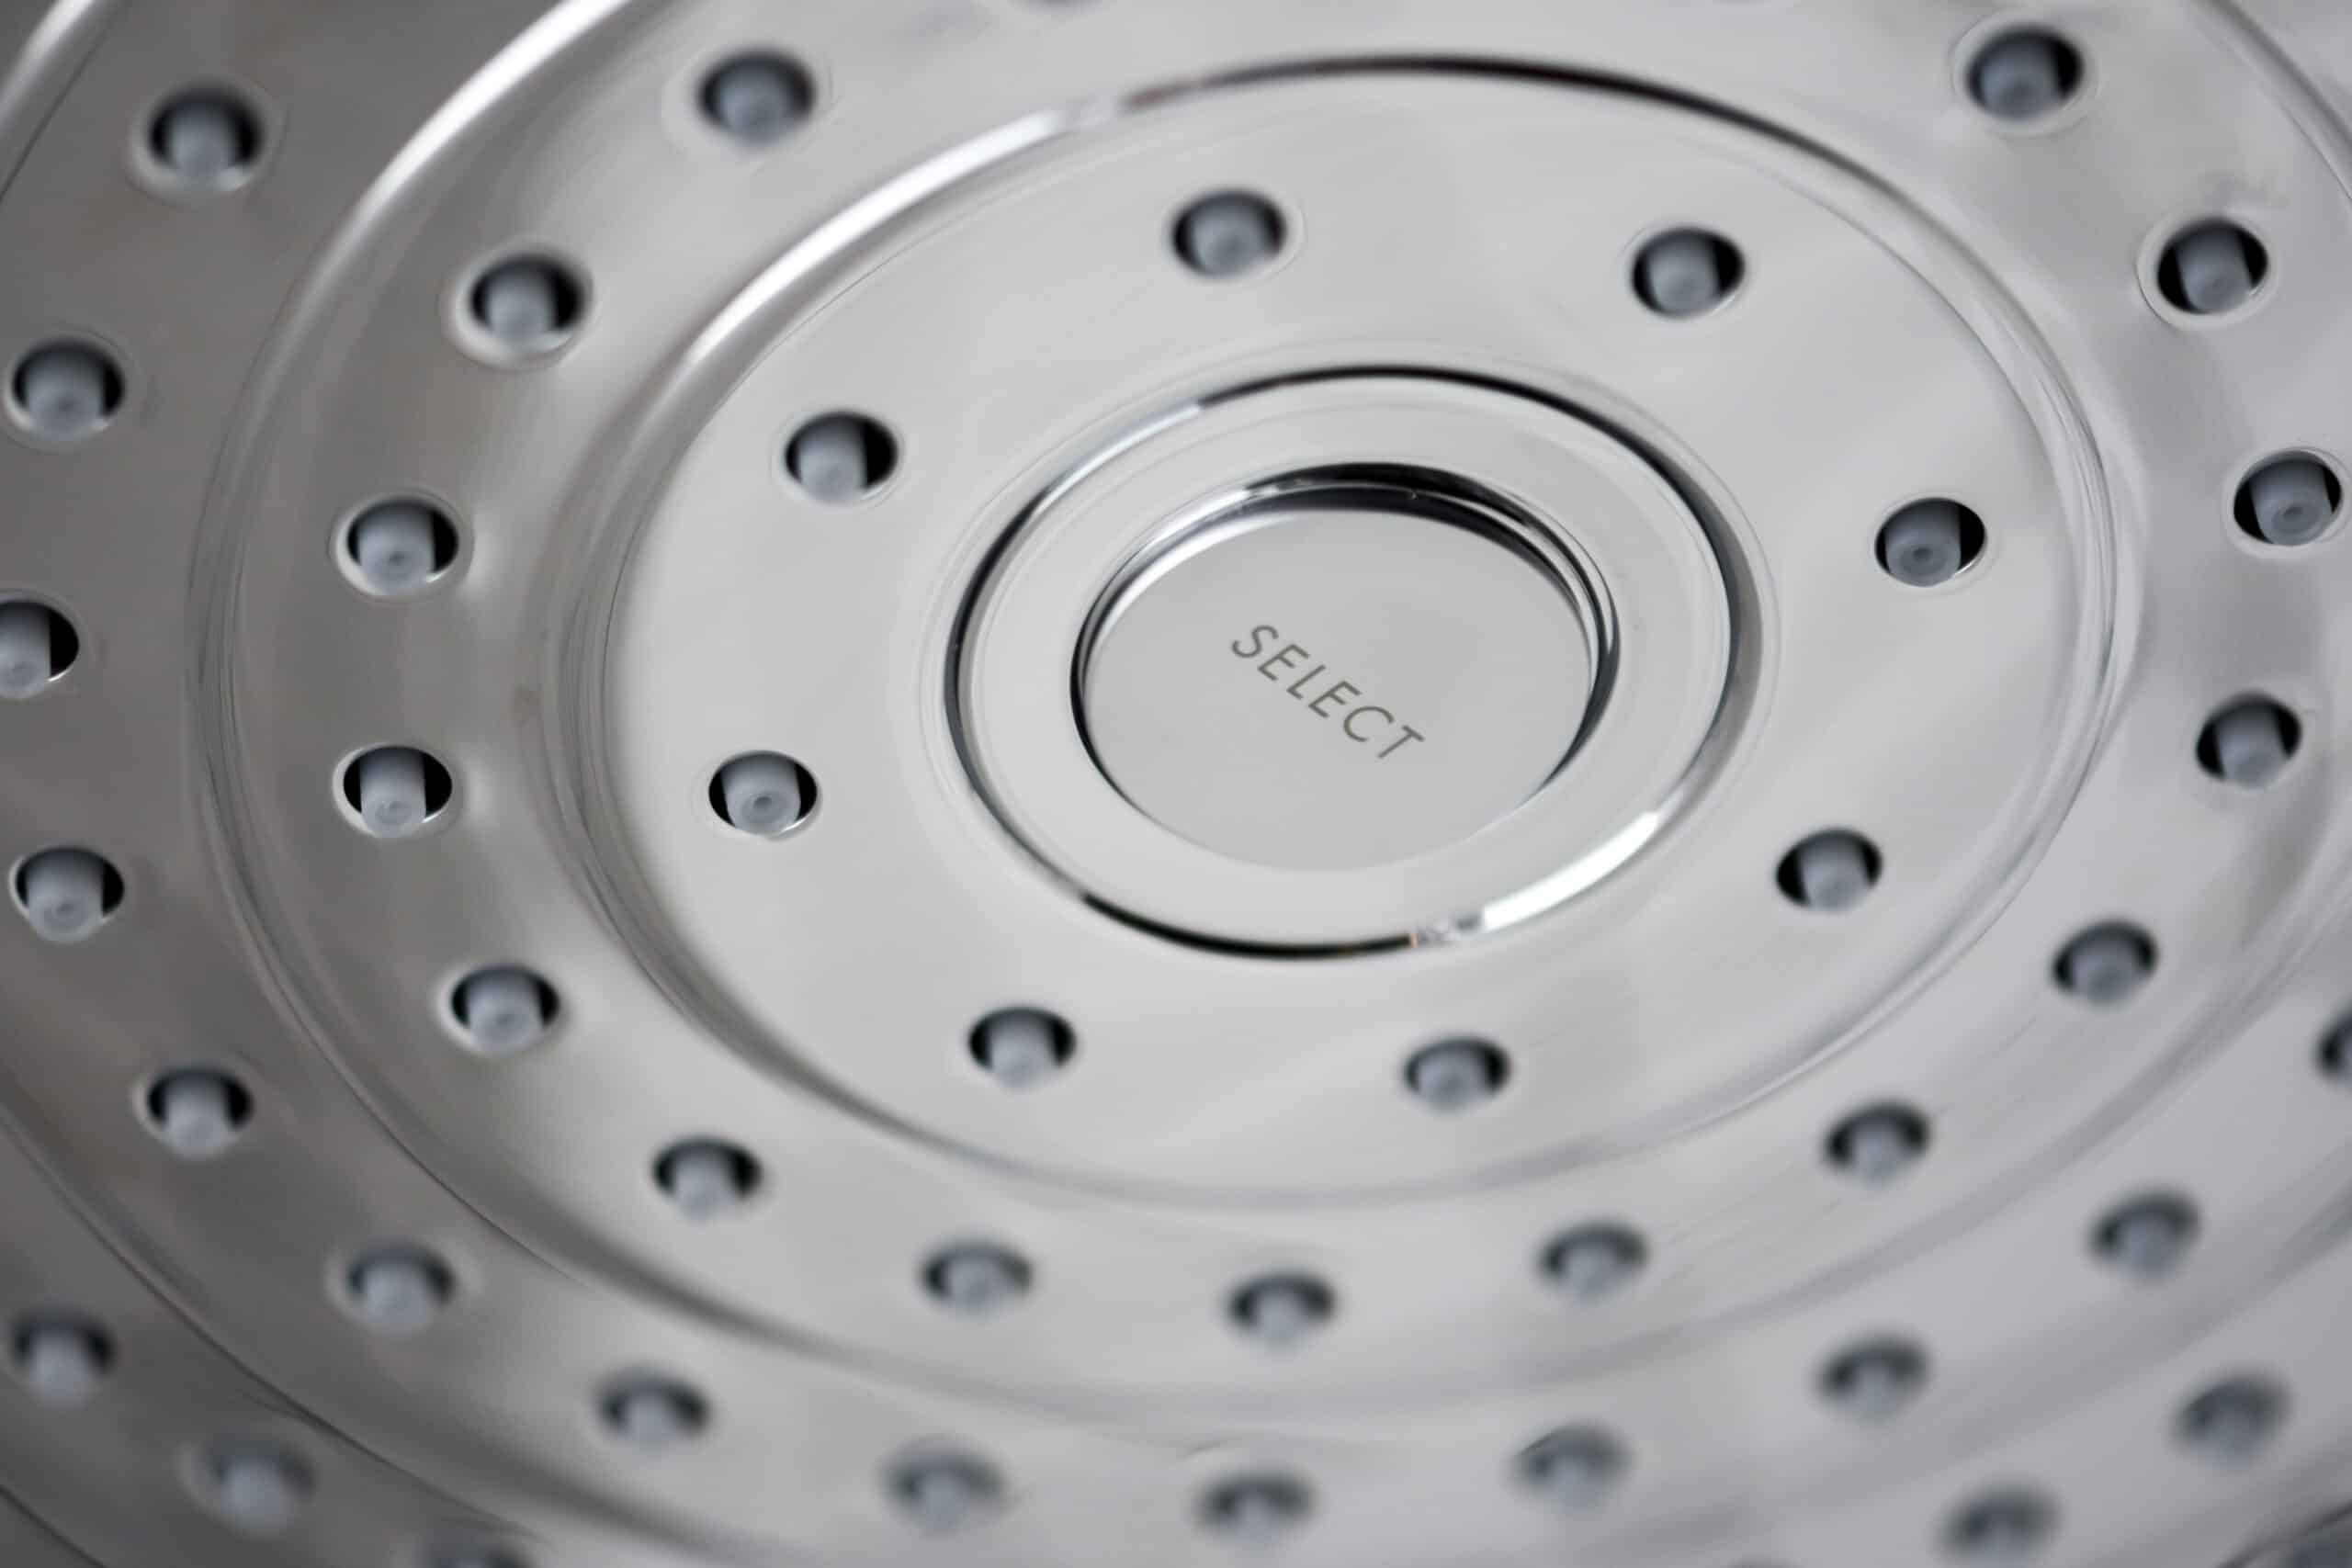 Hansgrohe Product Close Up Detail Photography - Showerhead